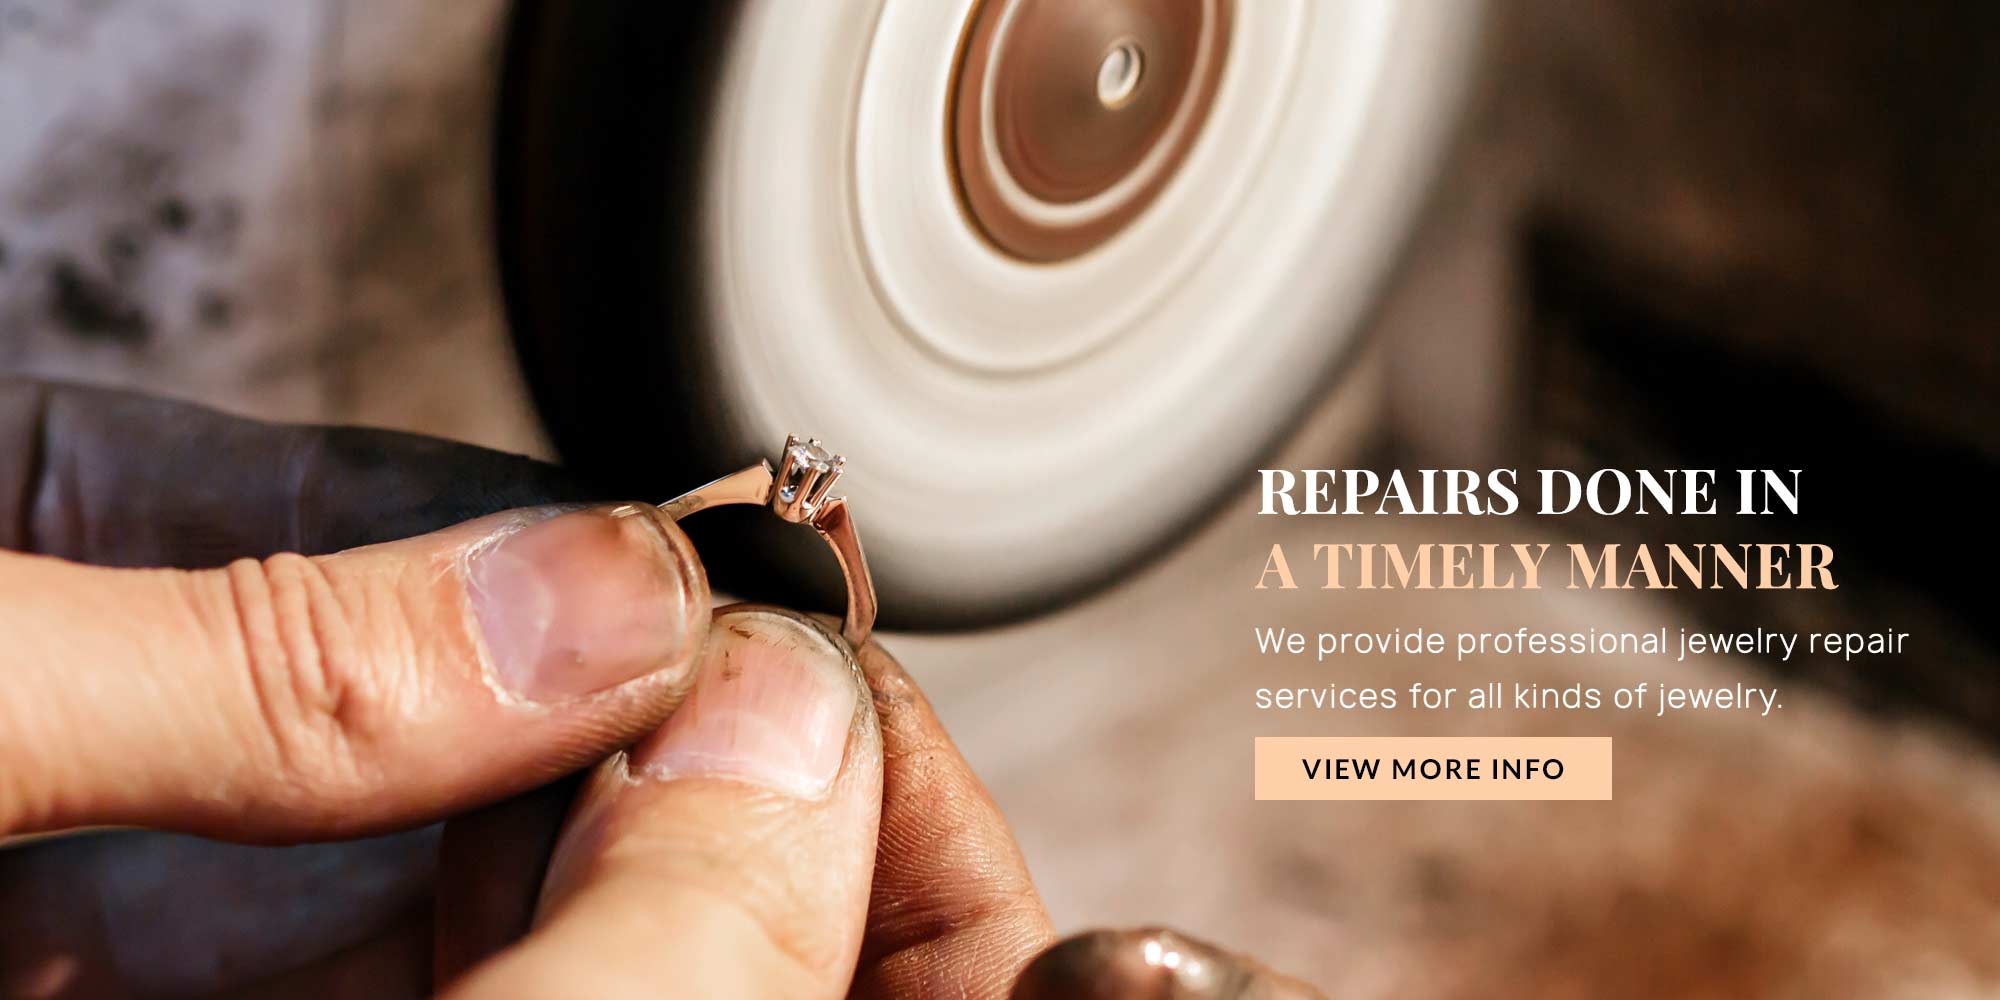 Repairs Done In A Timely Manner At Jefferson Estate Jewelers